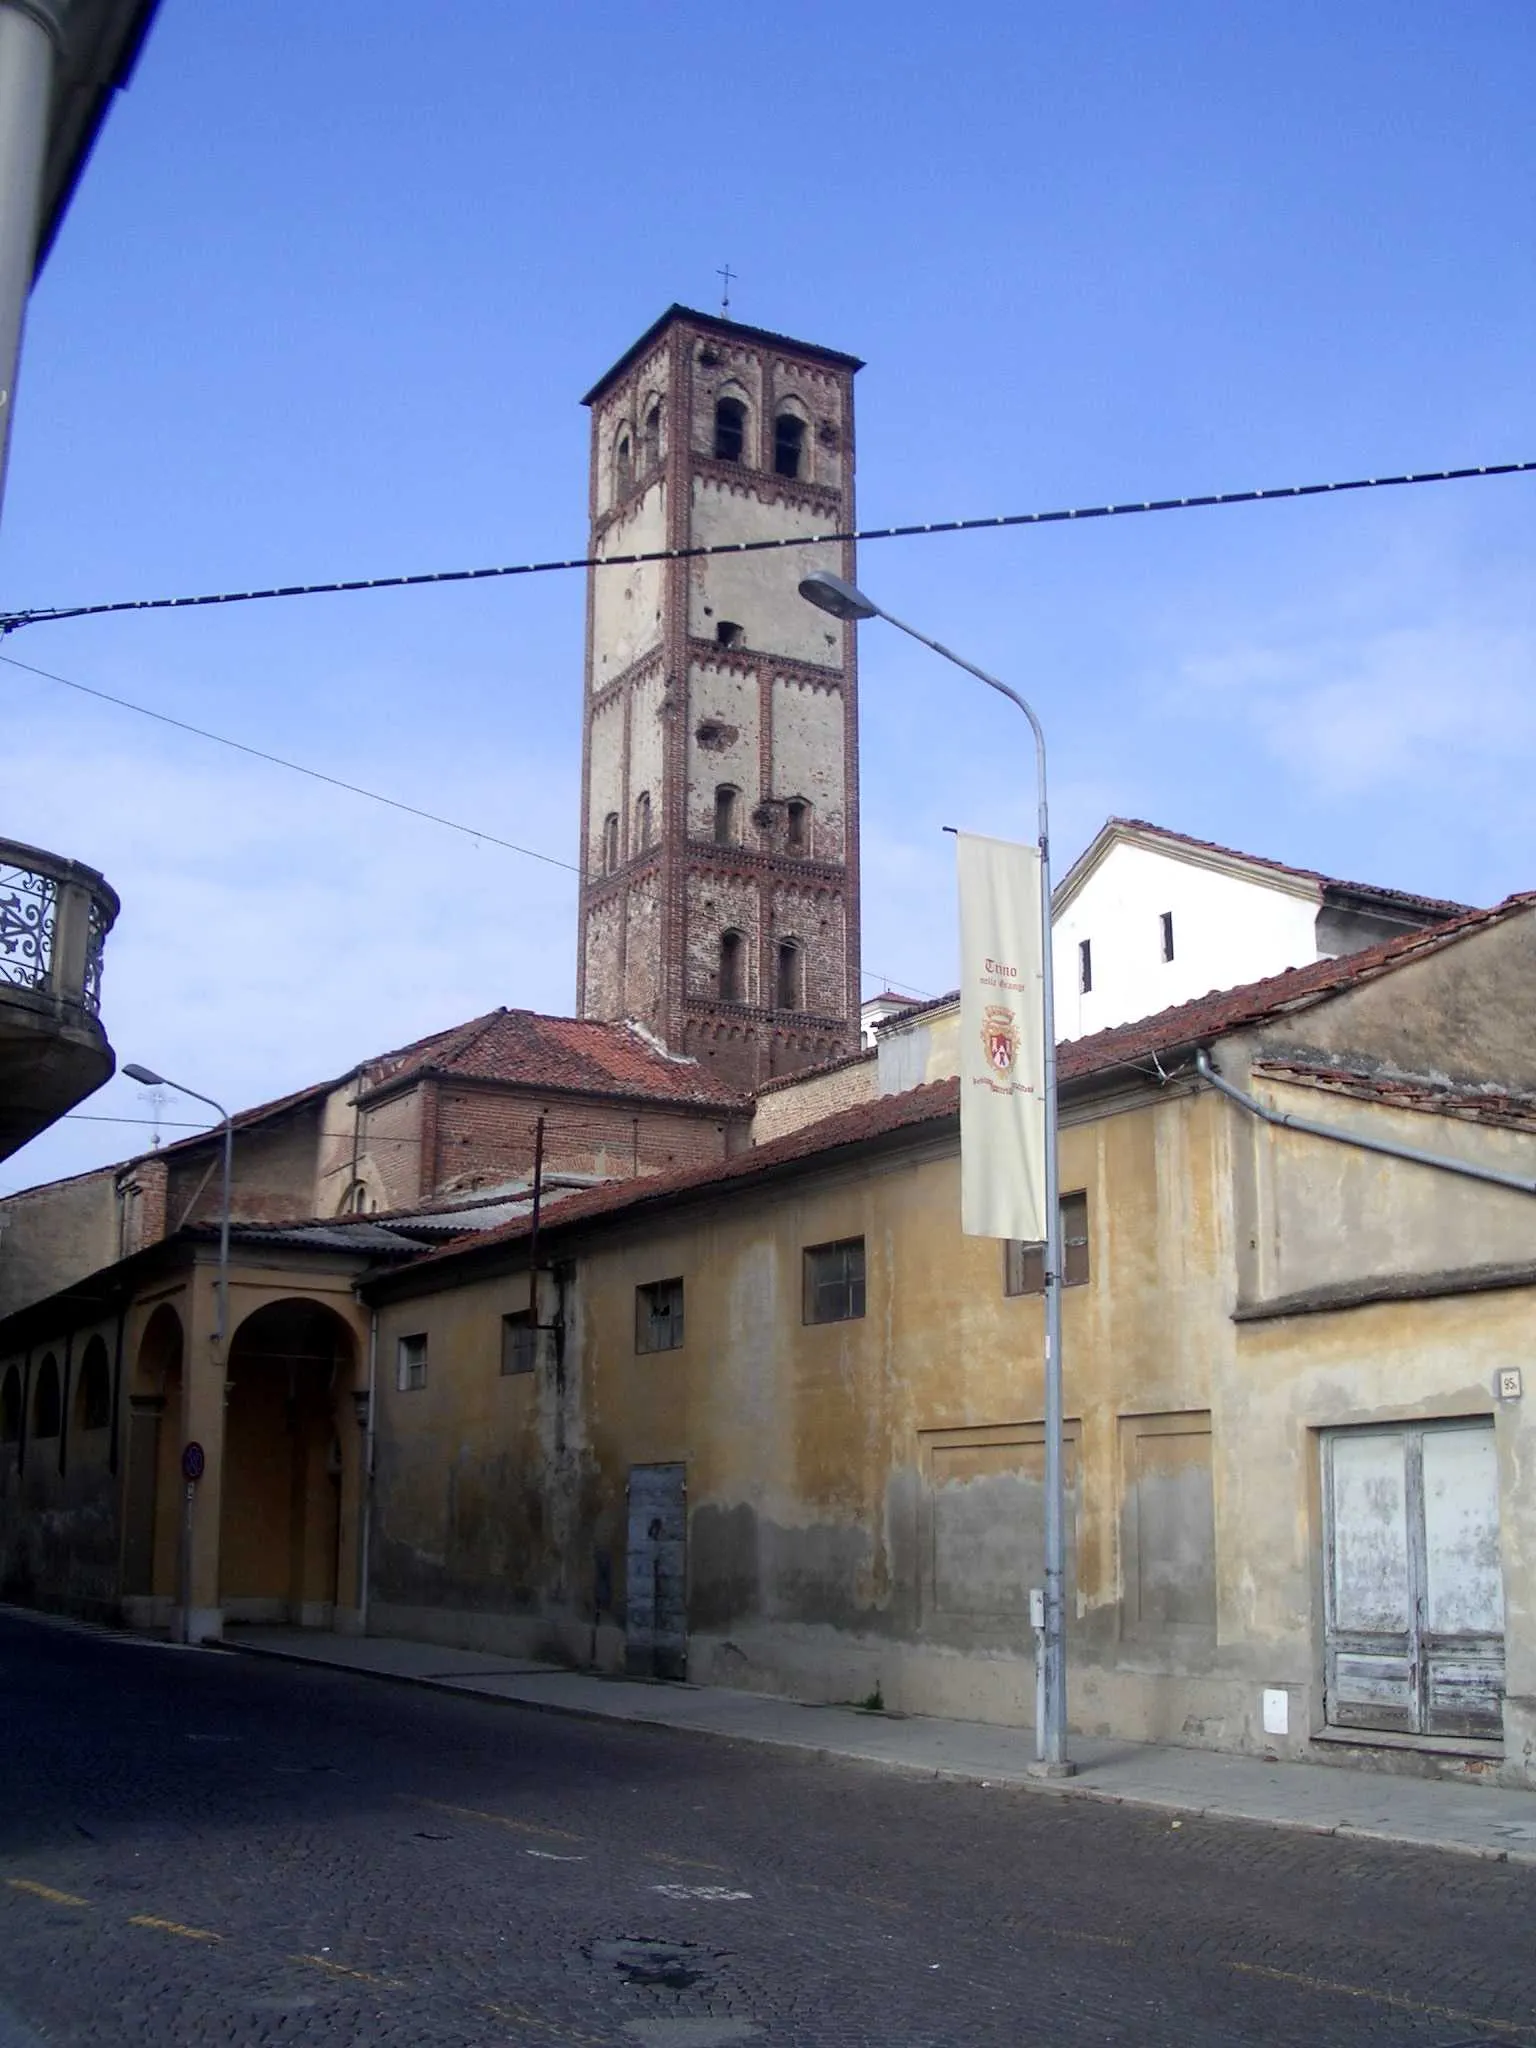 Photo showing: View of the town with campanile of St. Dominic church; Trino, Vercelli, Italy